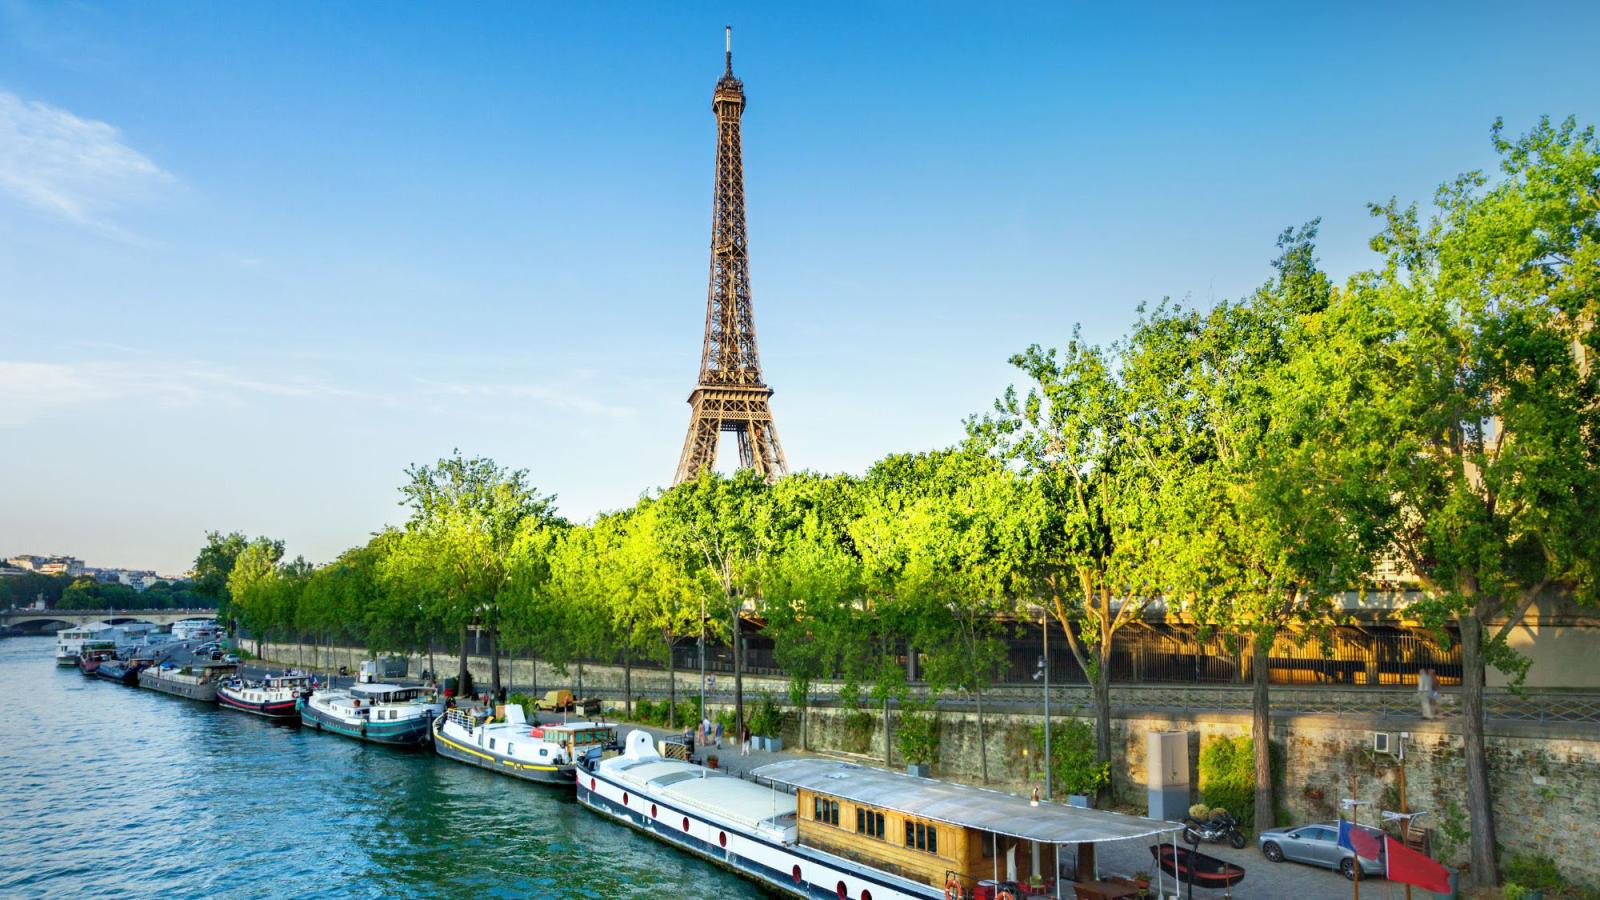 view of the Eiffel Tower, trees, and the River Seine in the city of Paris, France